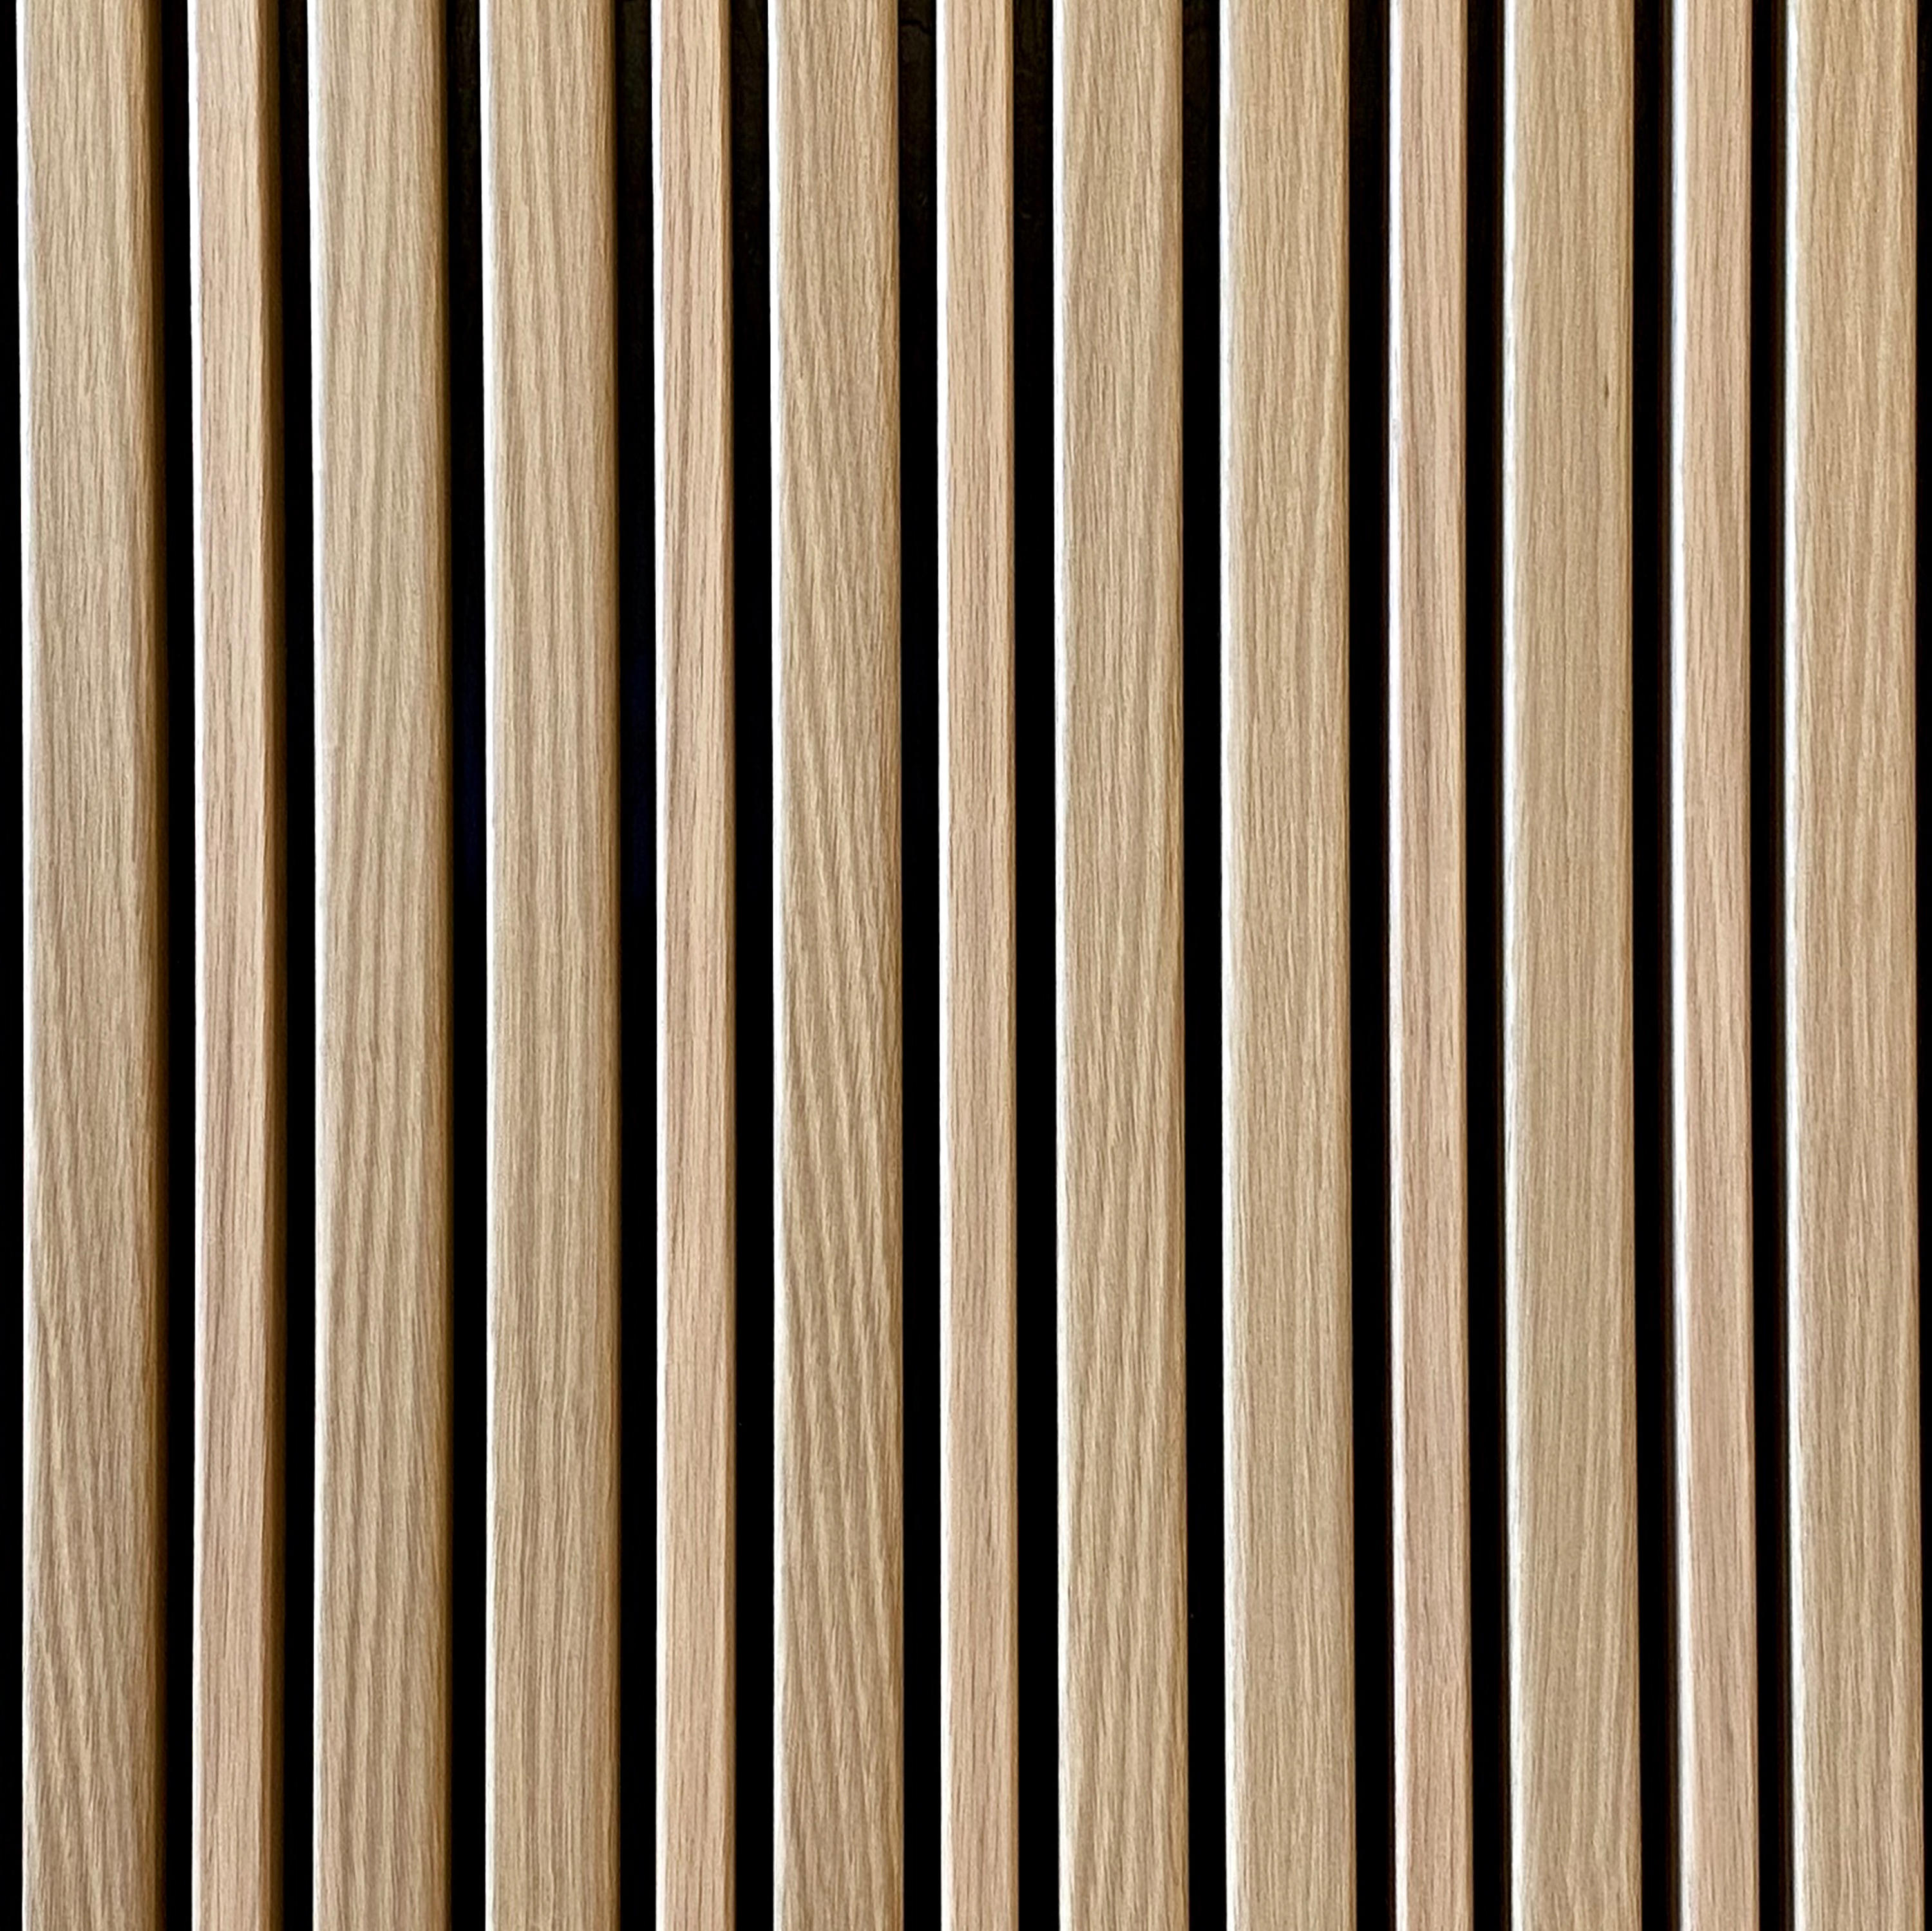 Linear Rib Mobilier Design Architonic Wood Texture Seamless Wood | My ...